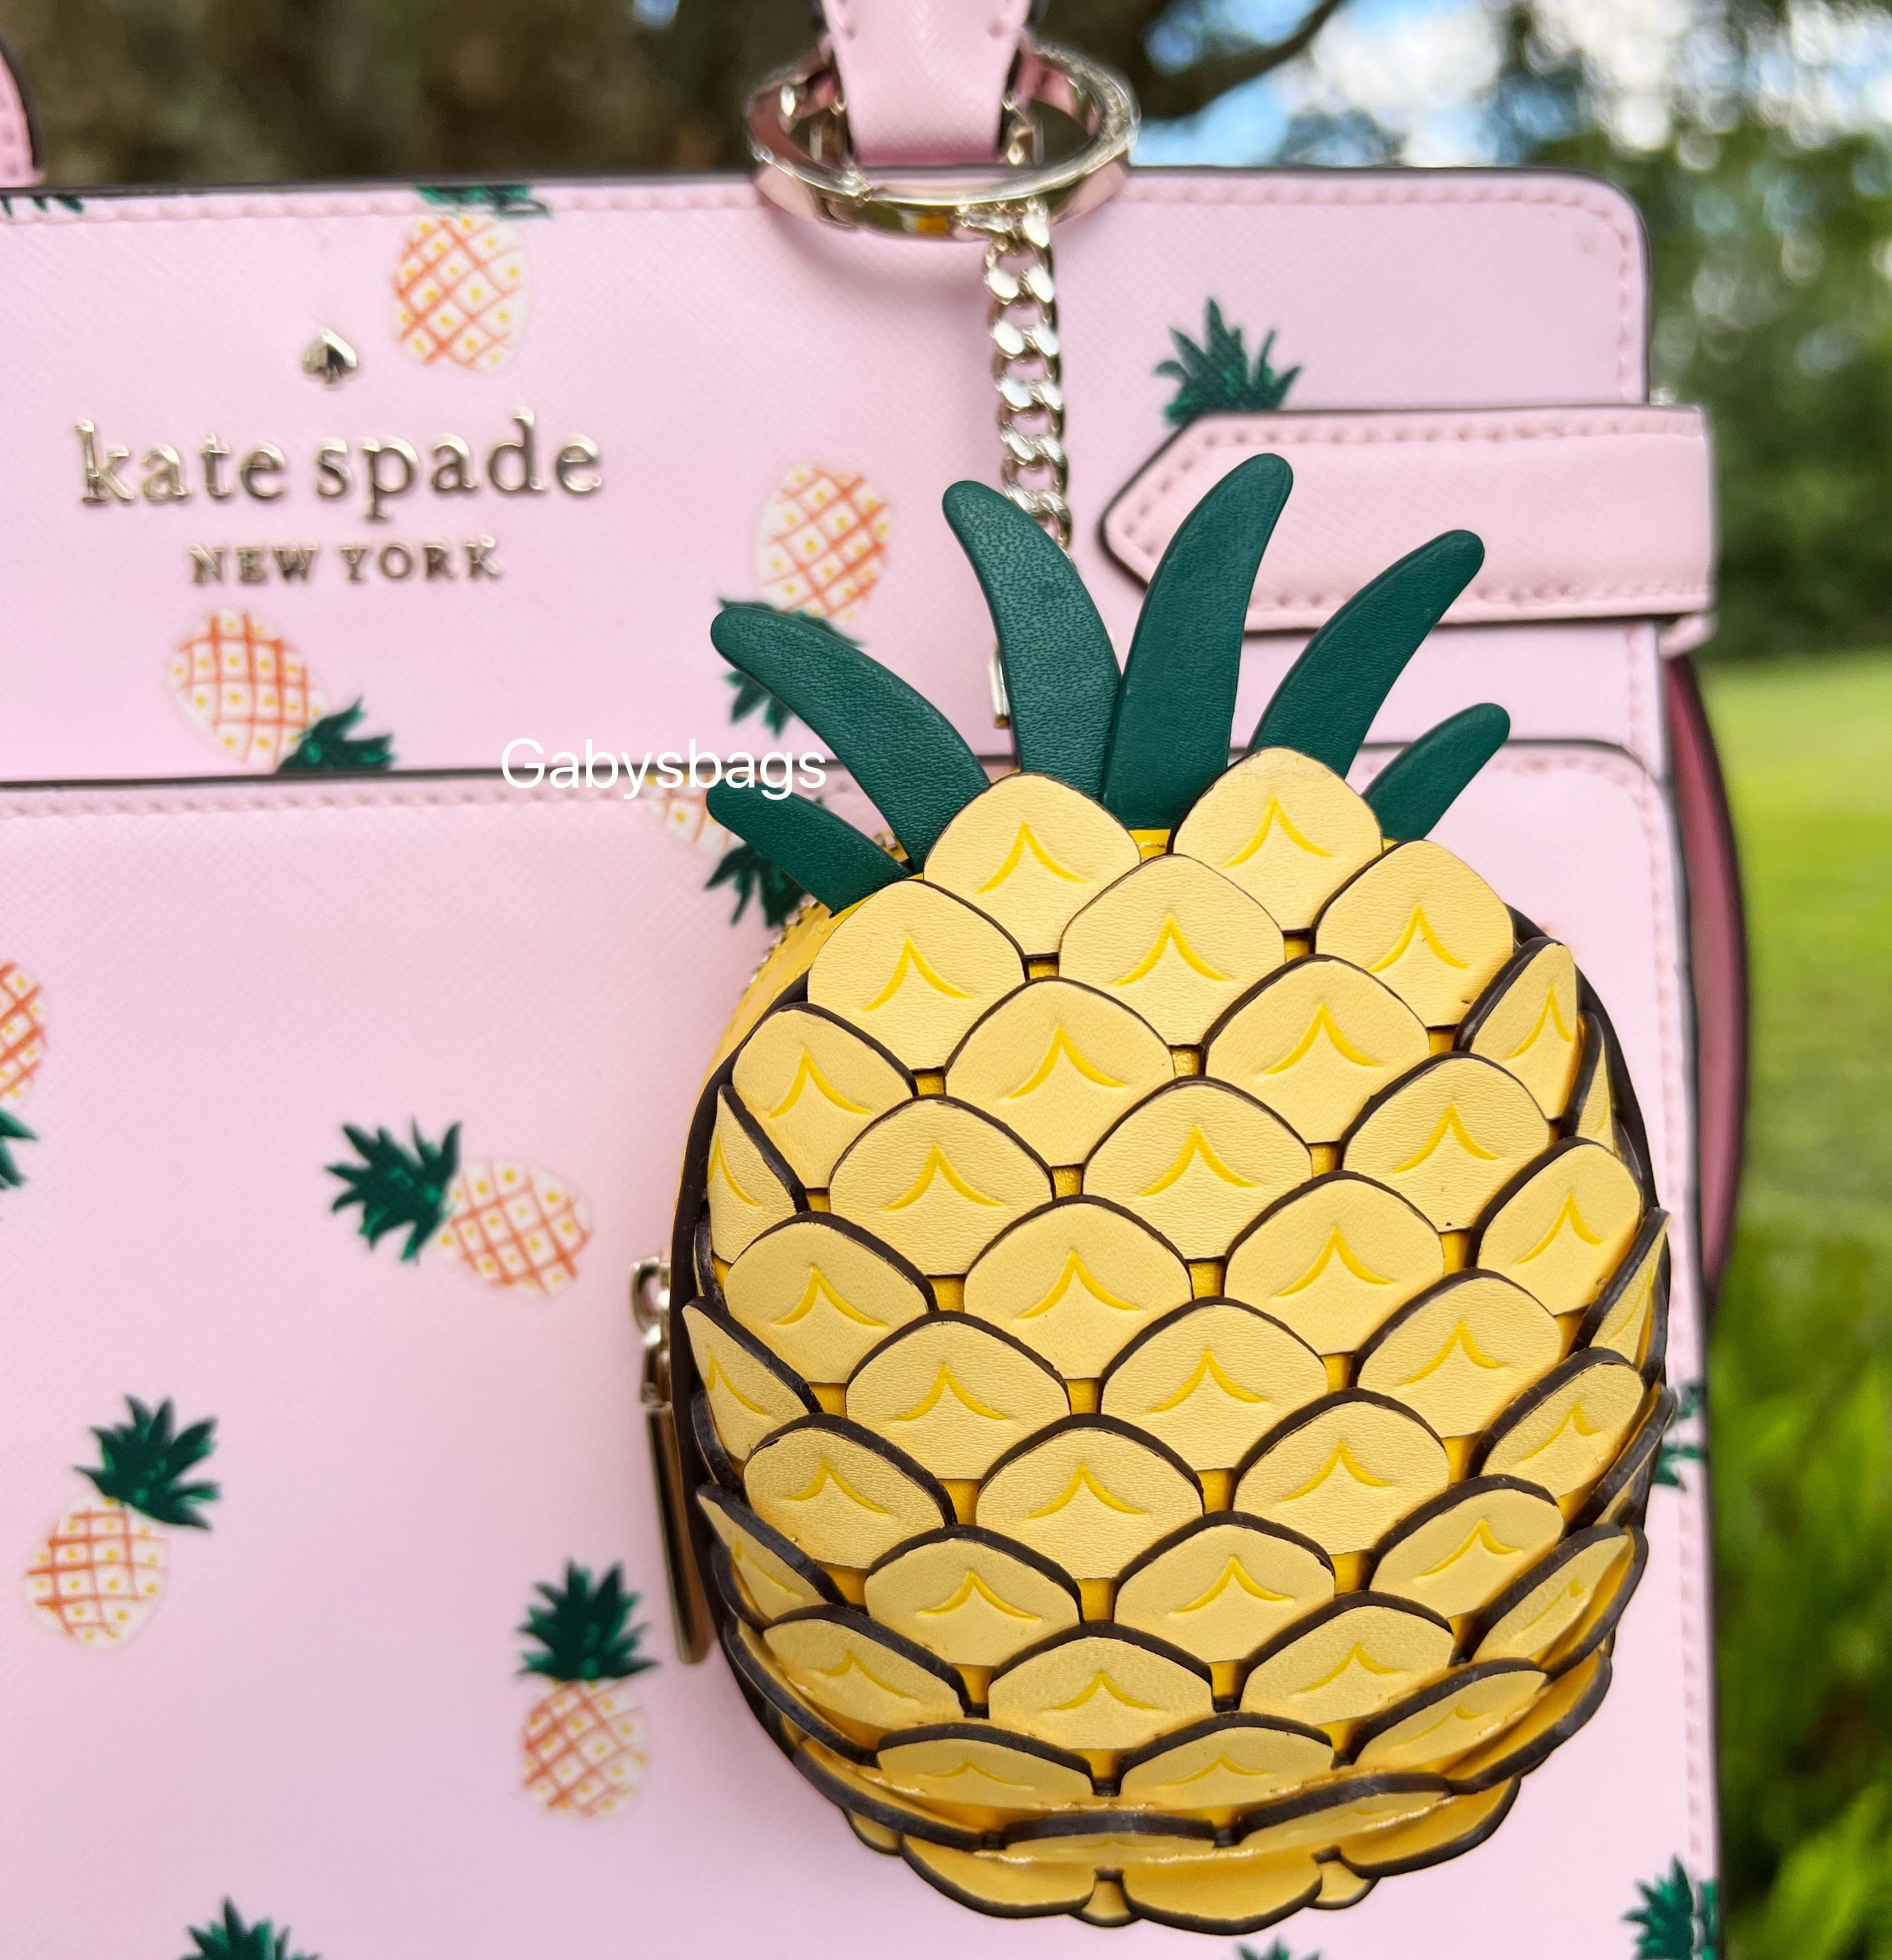 Kate Spade New York Pink & Teal Pineapple Staci North South Crossbody Bag, Best Price and Reviews